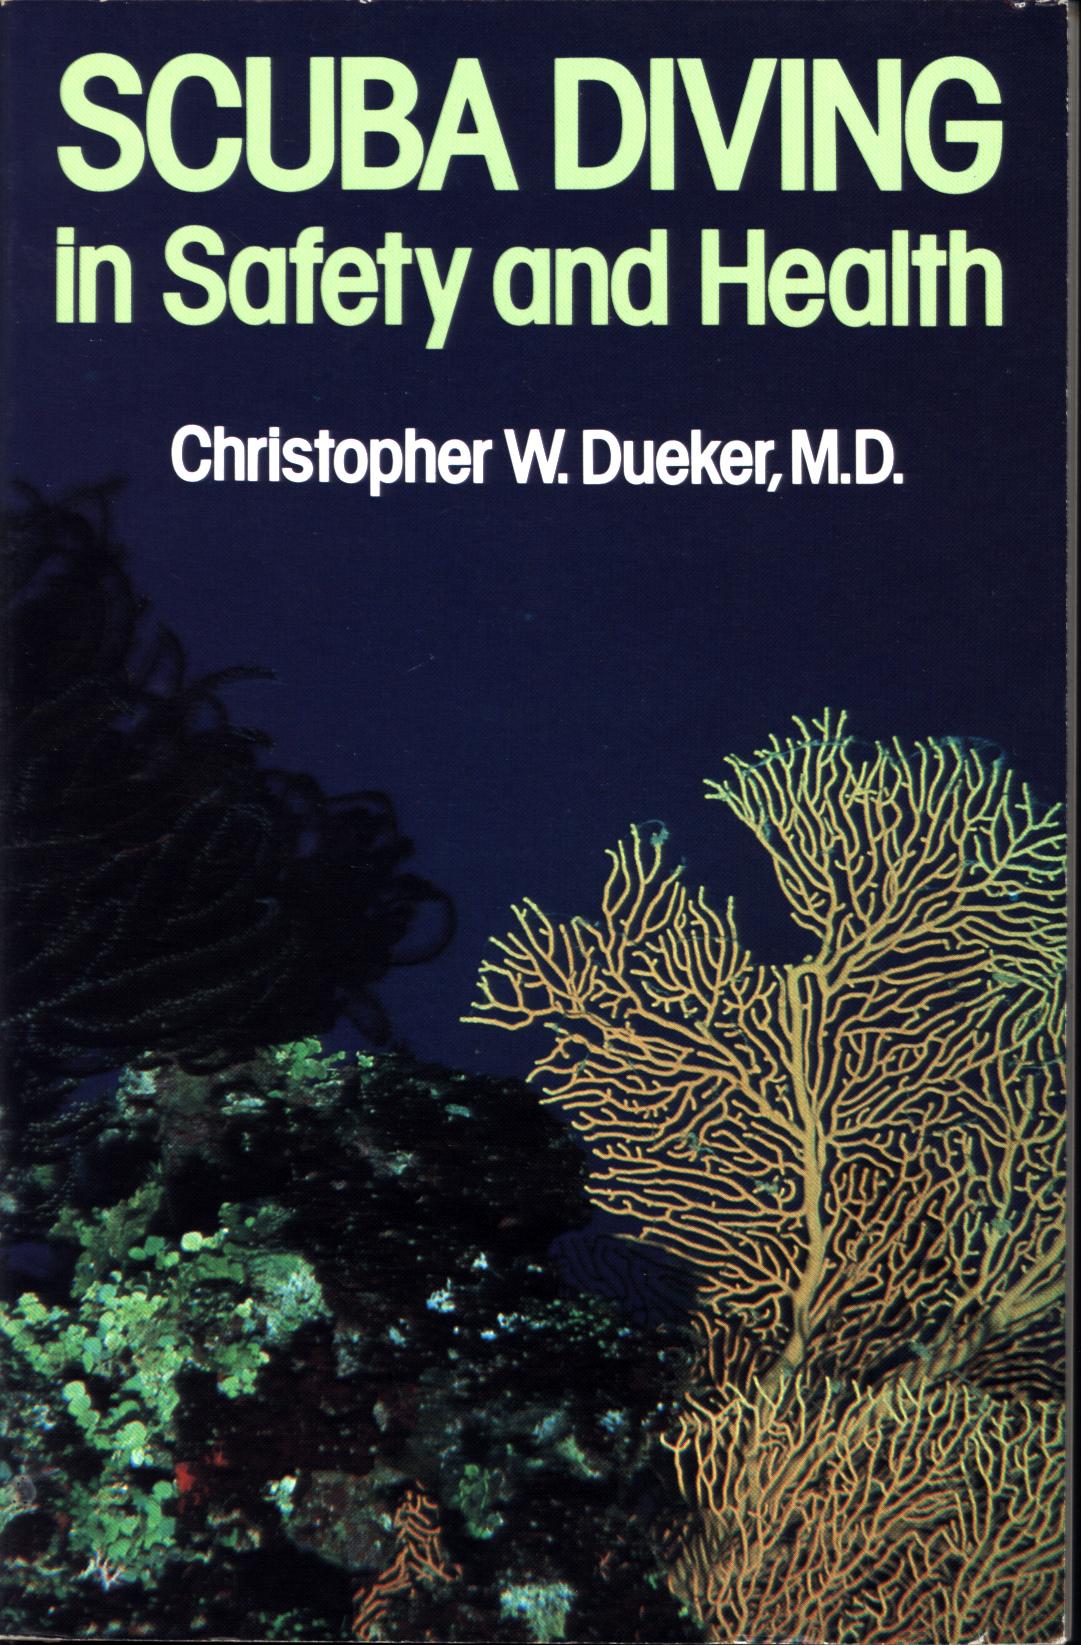 SCUBA DIVING IN SAFETY AND HEALTH. 